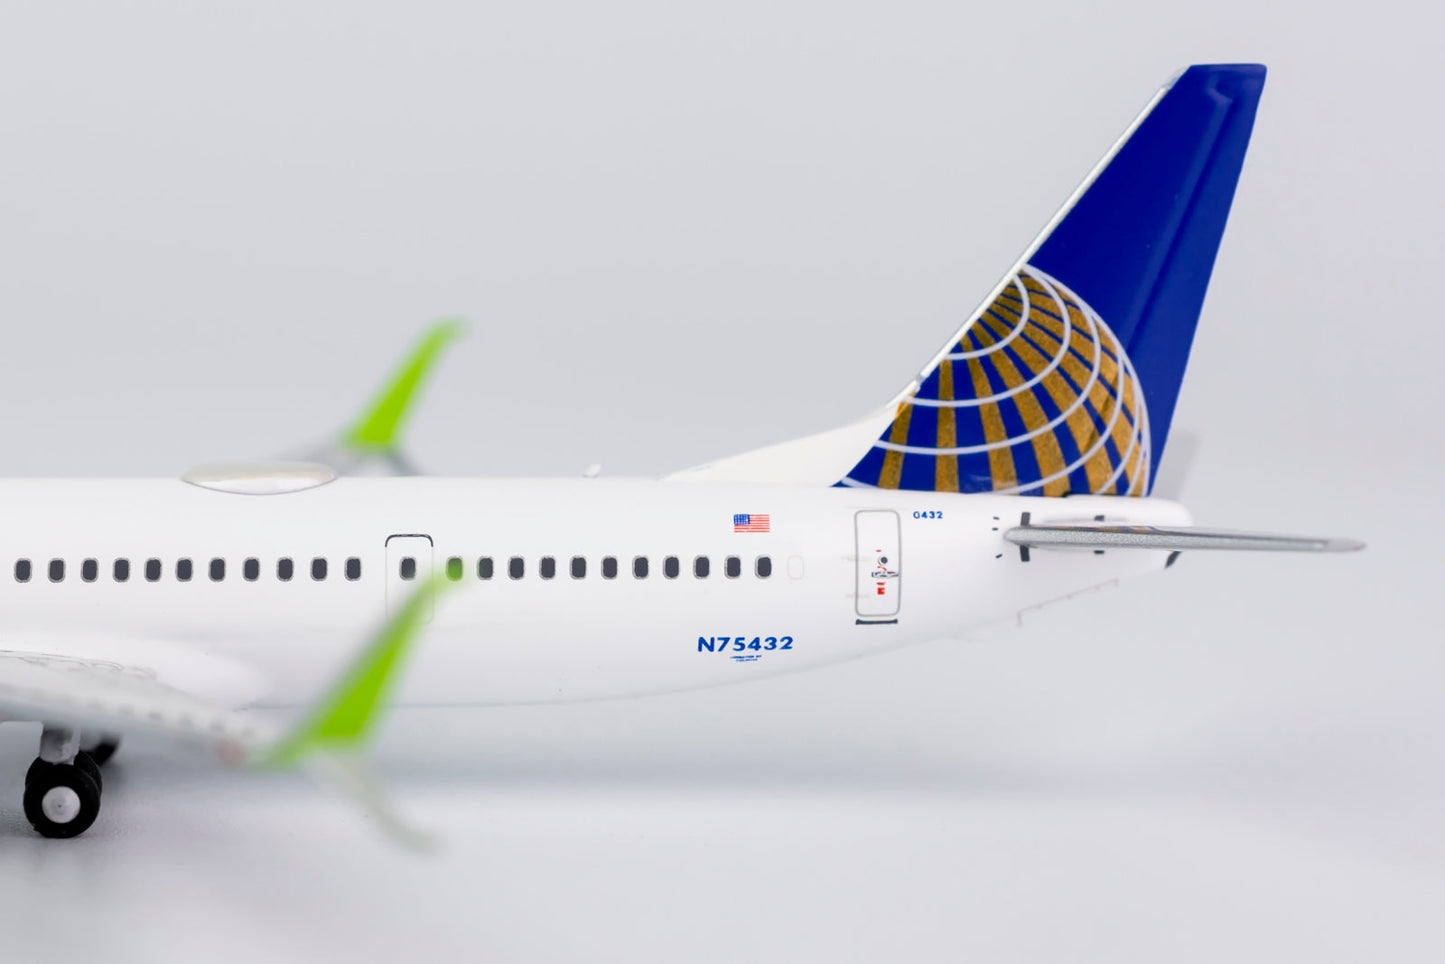 1/400 United Airlines B 737-900ER/w "Special Eco-skies Livery" NG Models 79009